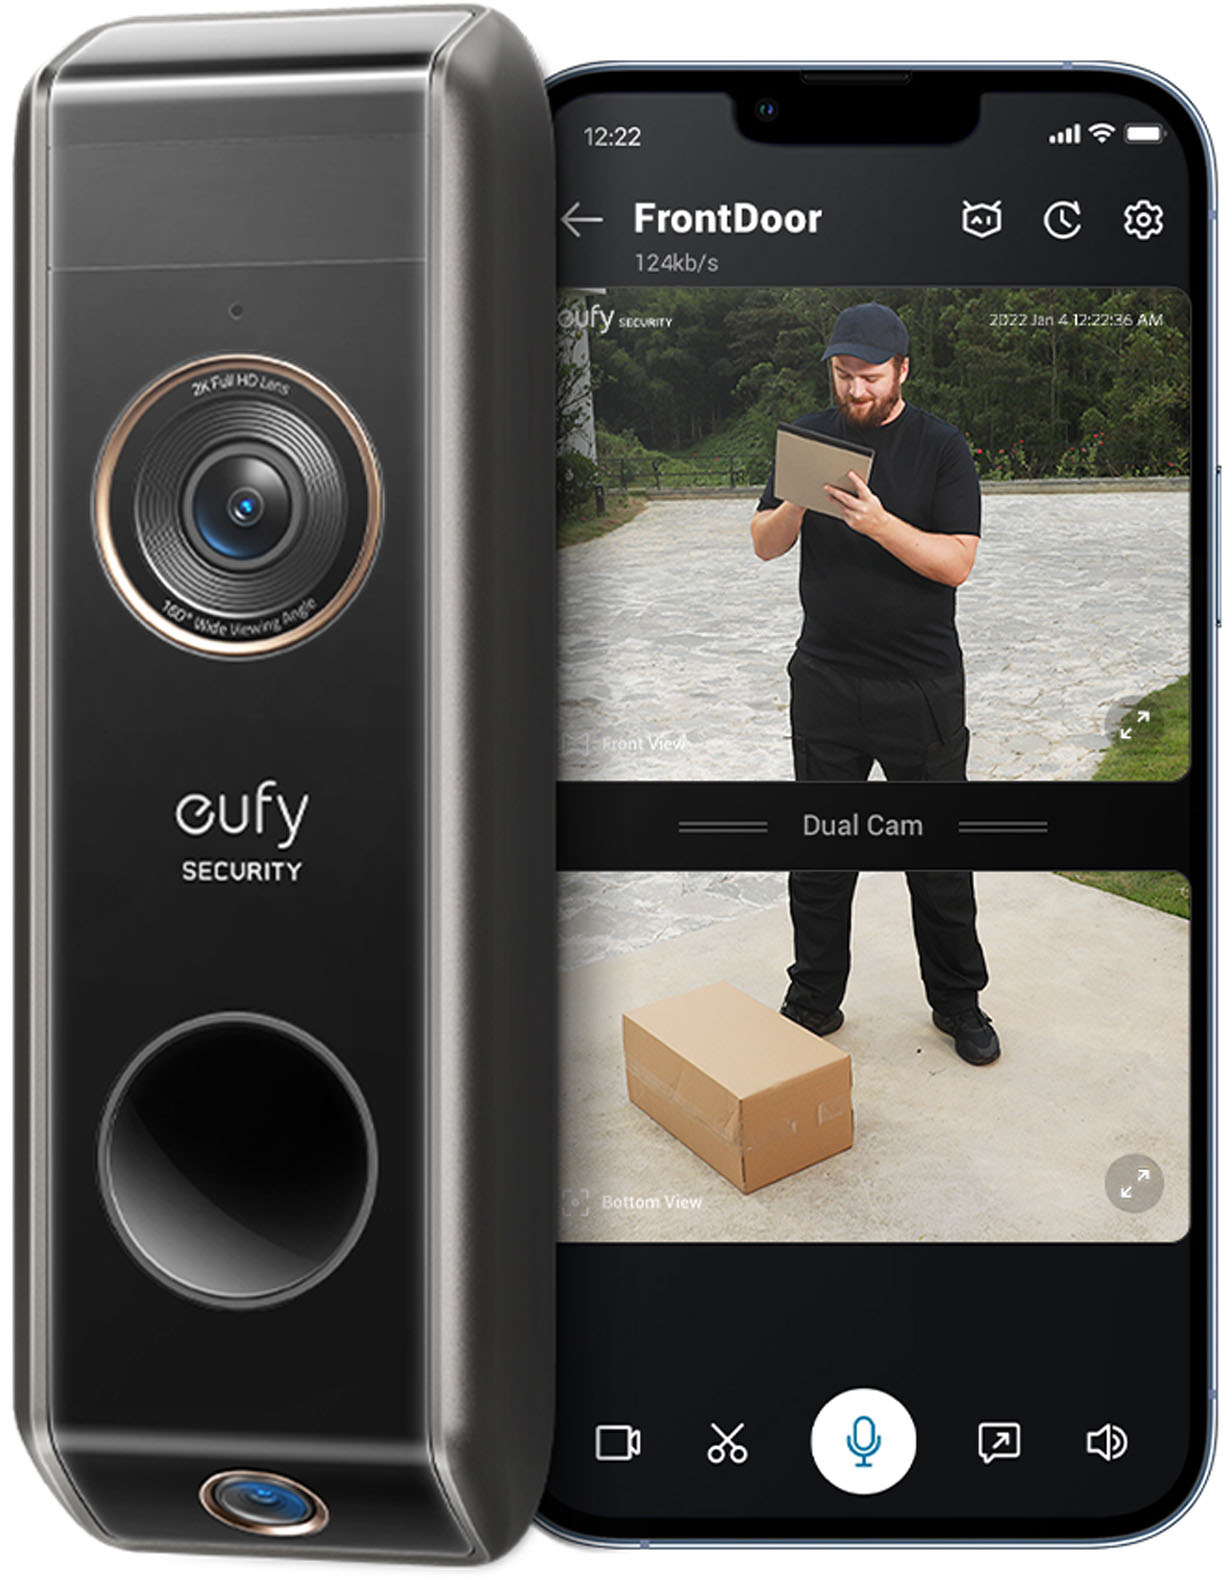 eufy Security Smart Wi-Fi Video Doorbell 2K Battery Operated/Wired